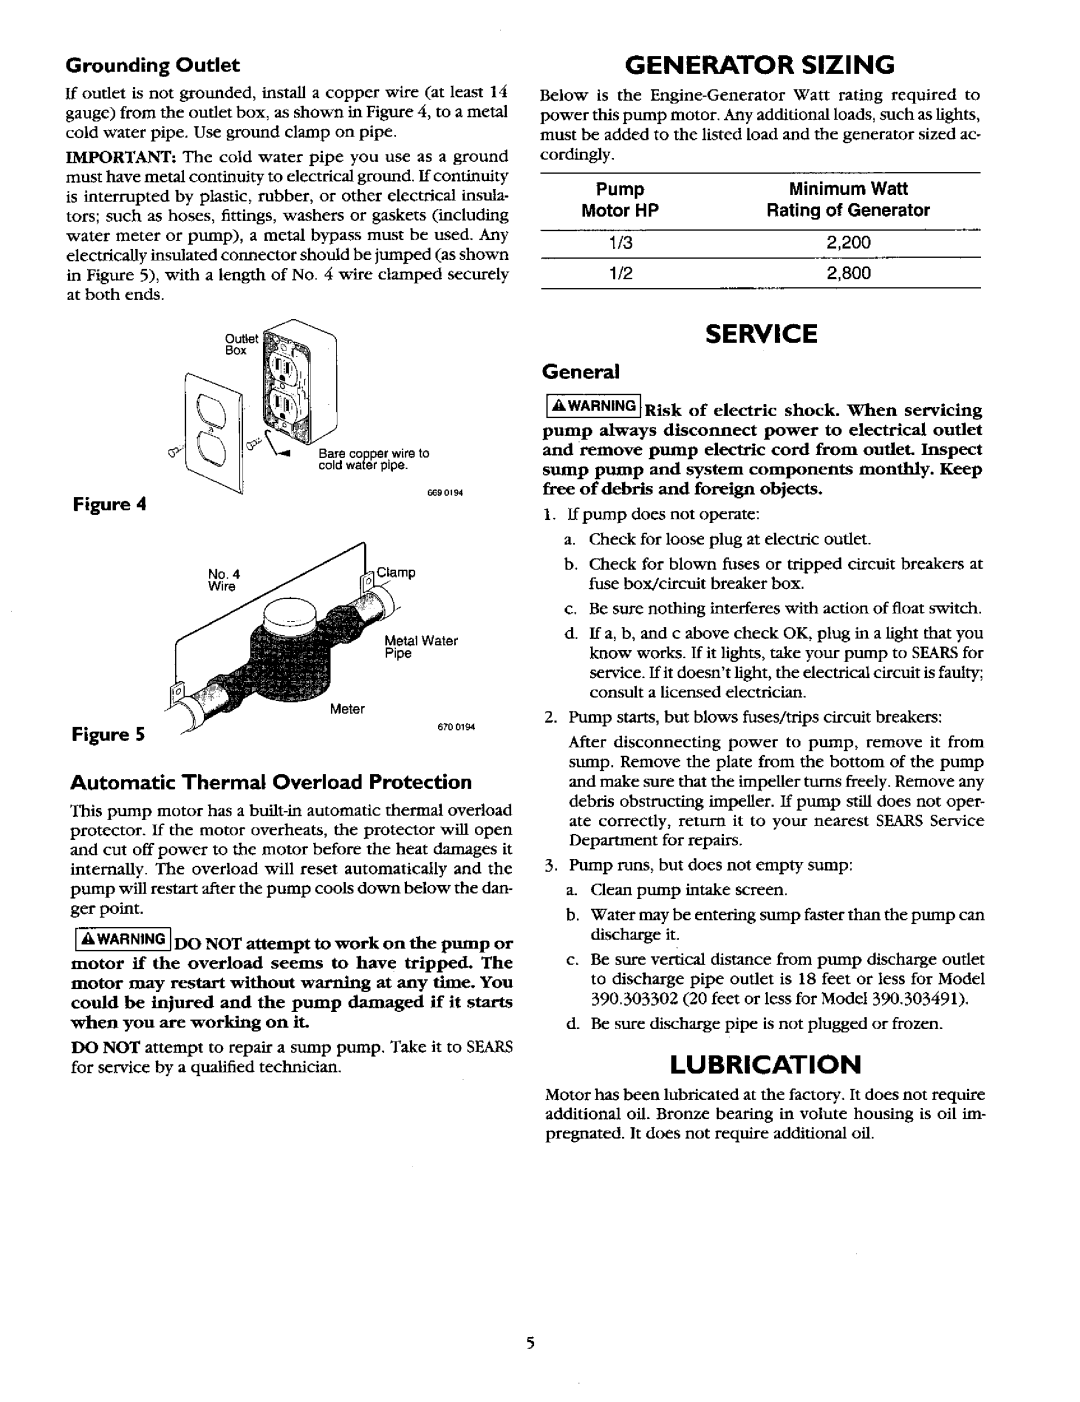 Sears 390.303302 Service, Lubrication, Generator Sizing, Automatic Thermal Overload Protection, General, Grounding Outlet 